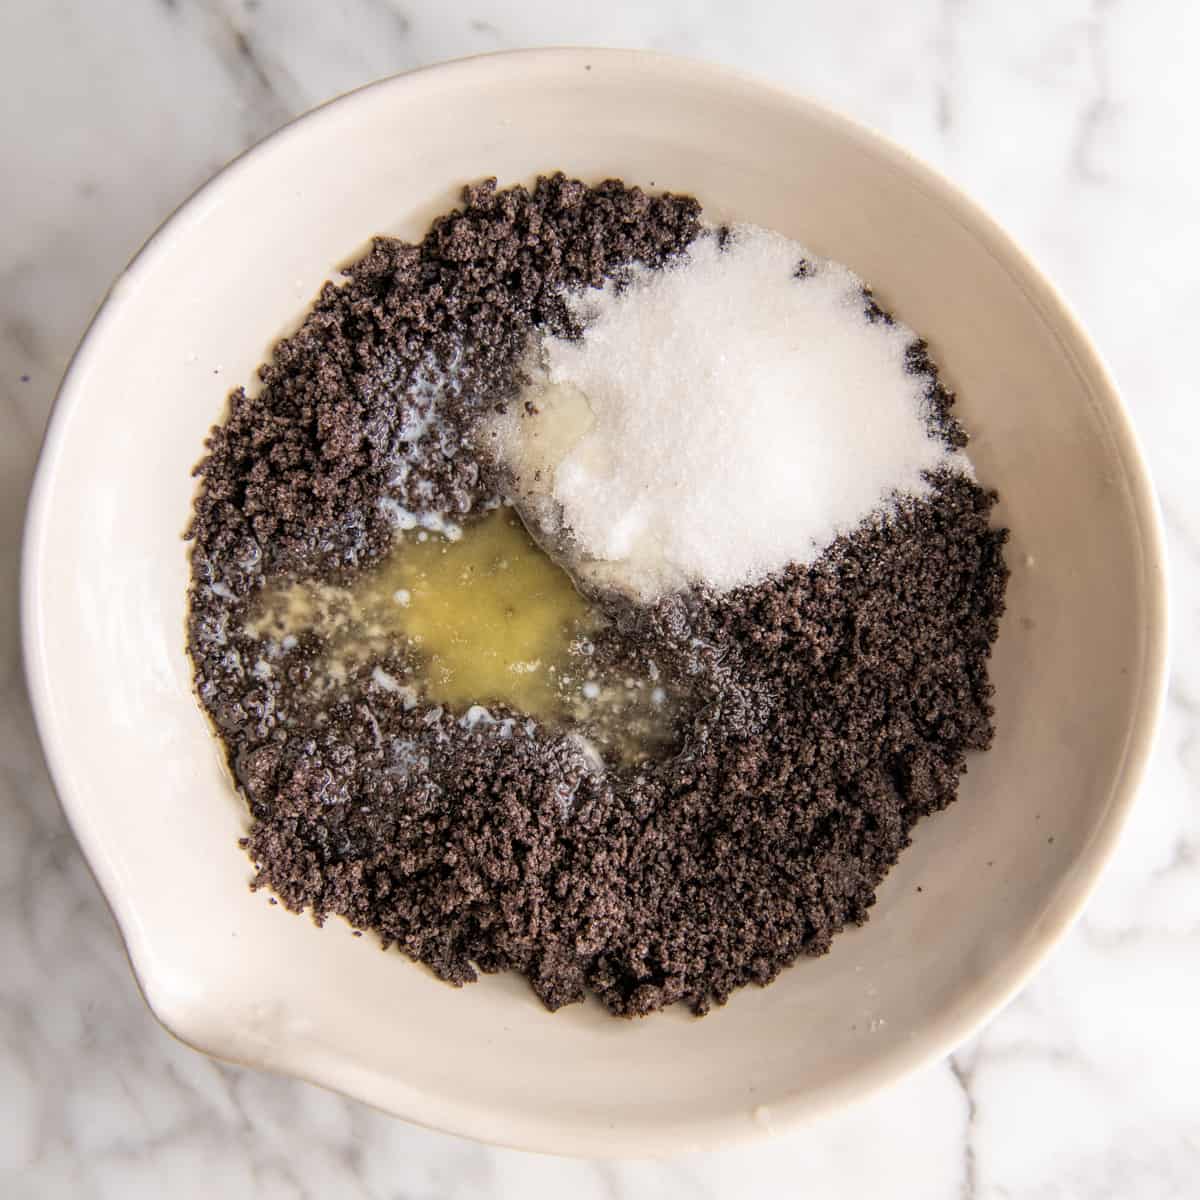 Oreo crumbs, butter and sugar in a mixing bowl